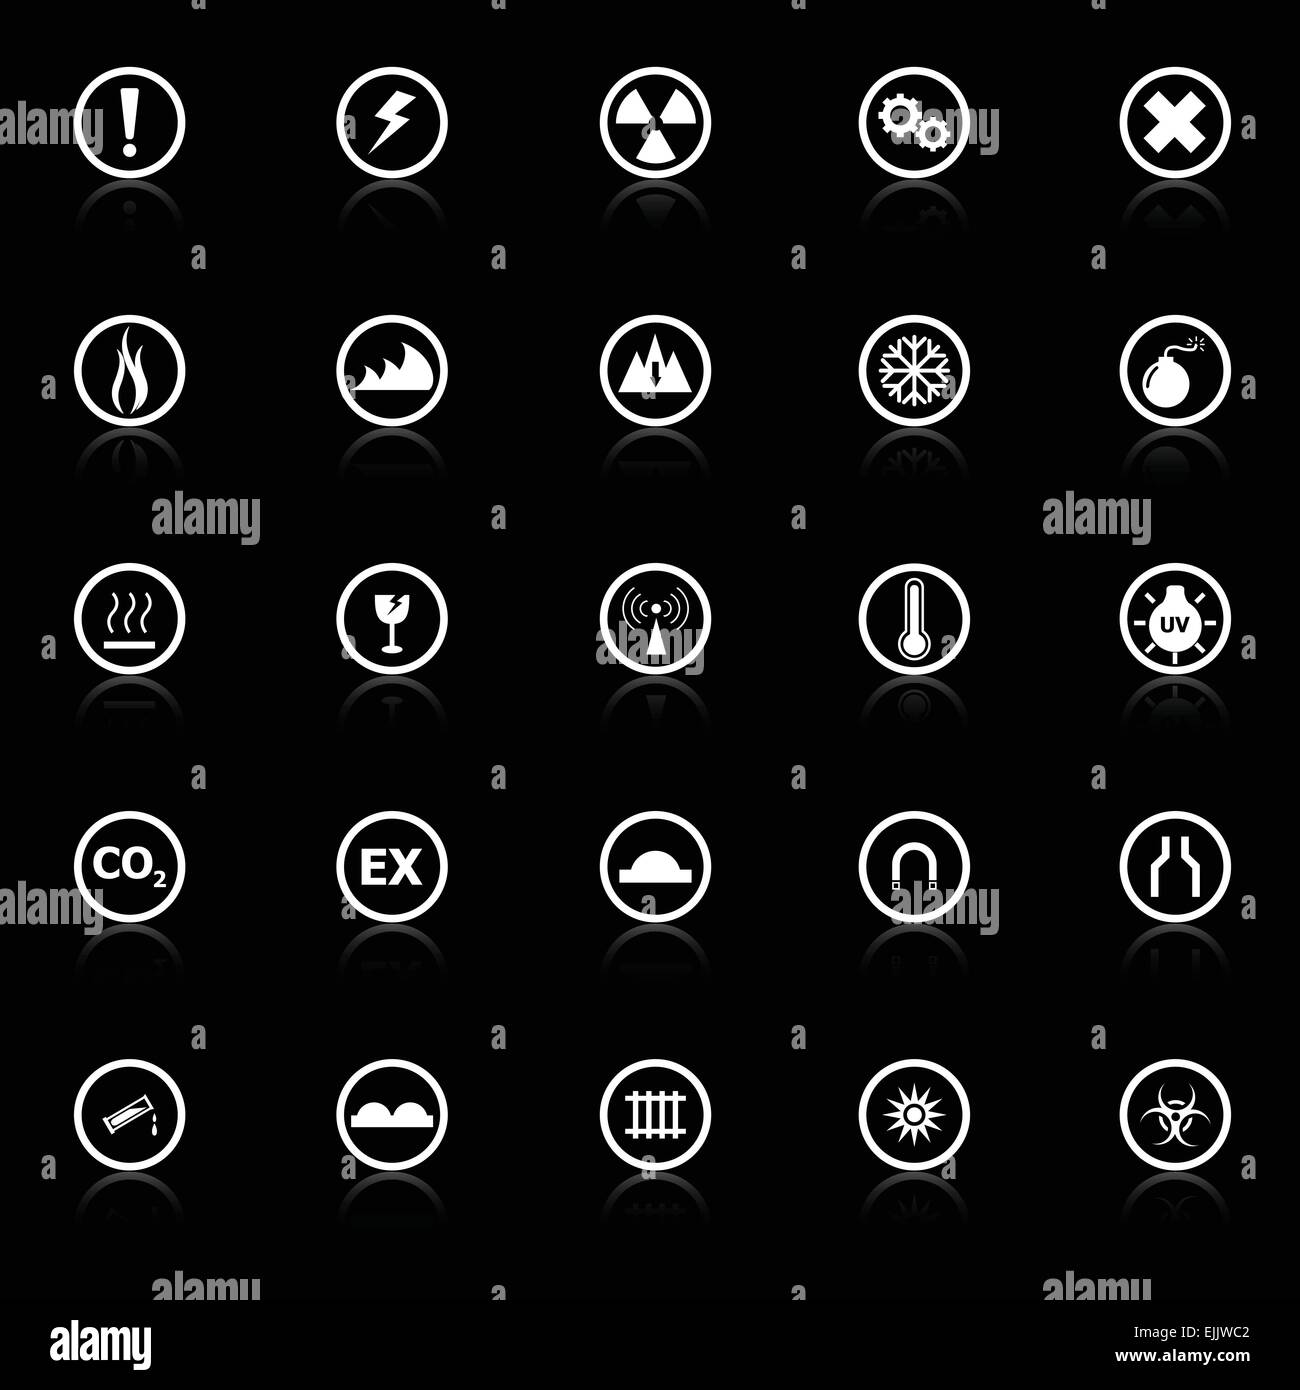 Warning sign icons with reflect on black background, stock vector Stock Vector